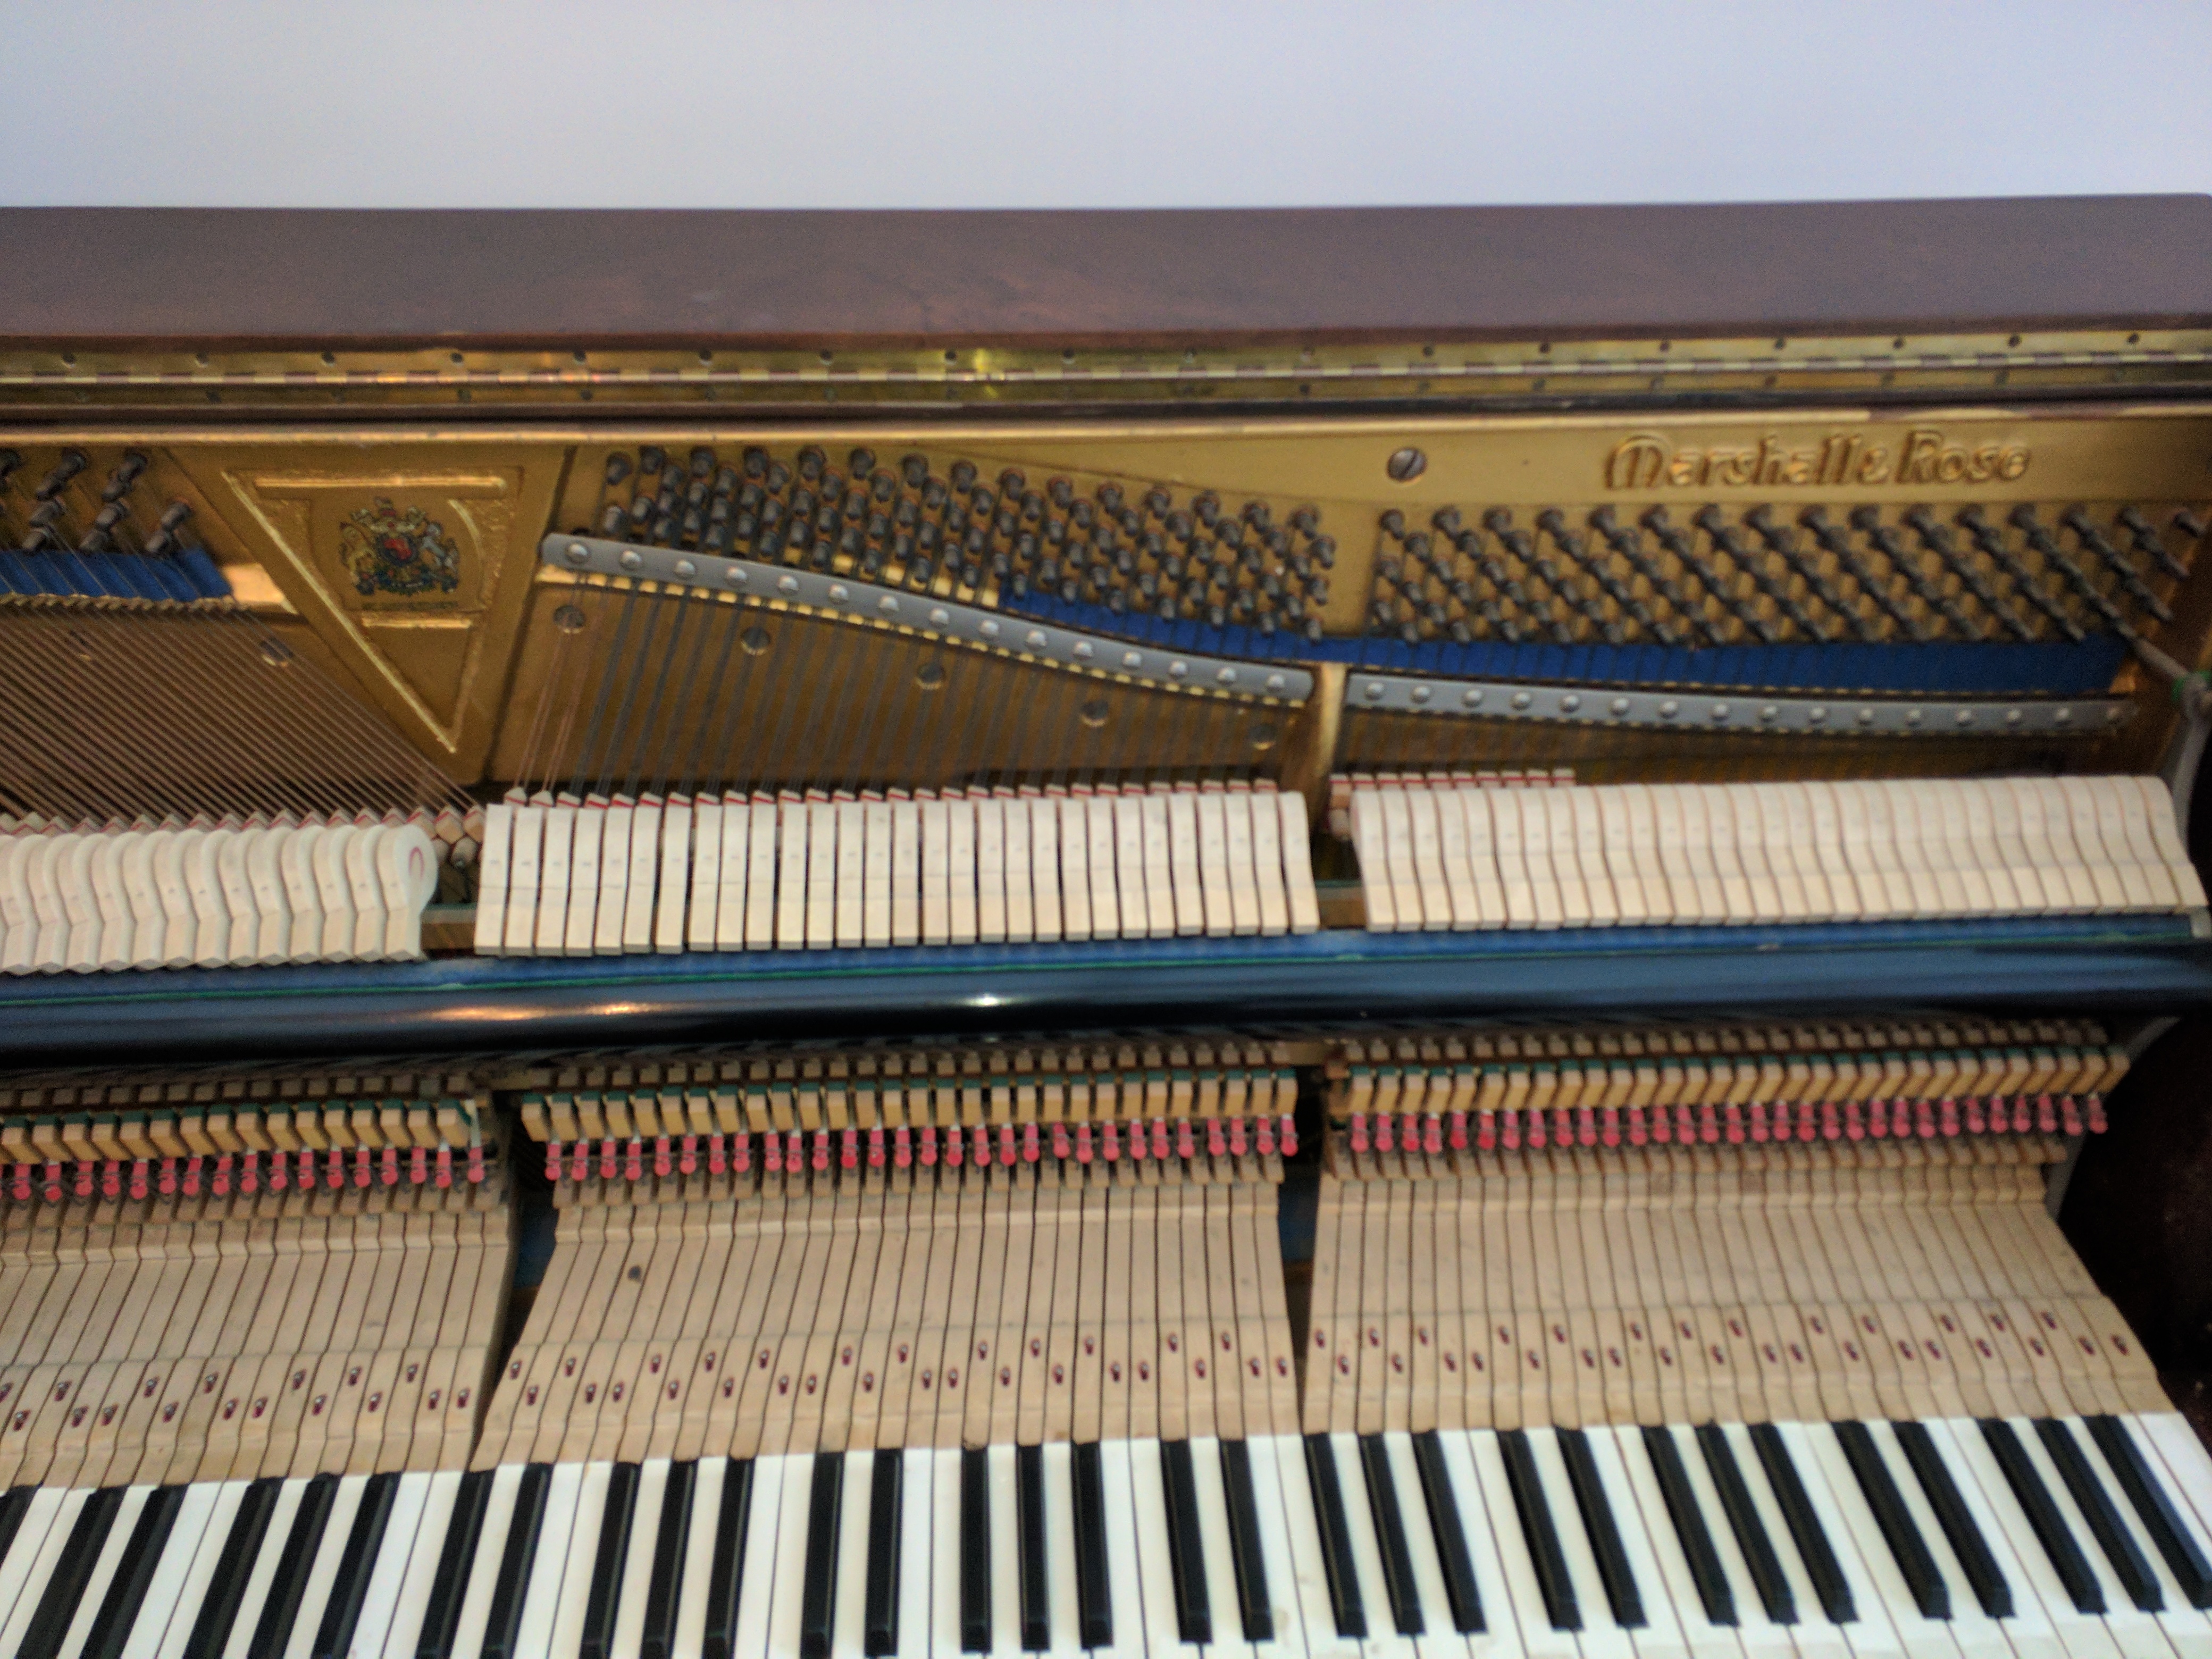 View of restored action of 1930s Marshall and Rose Upright Piano